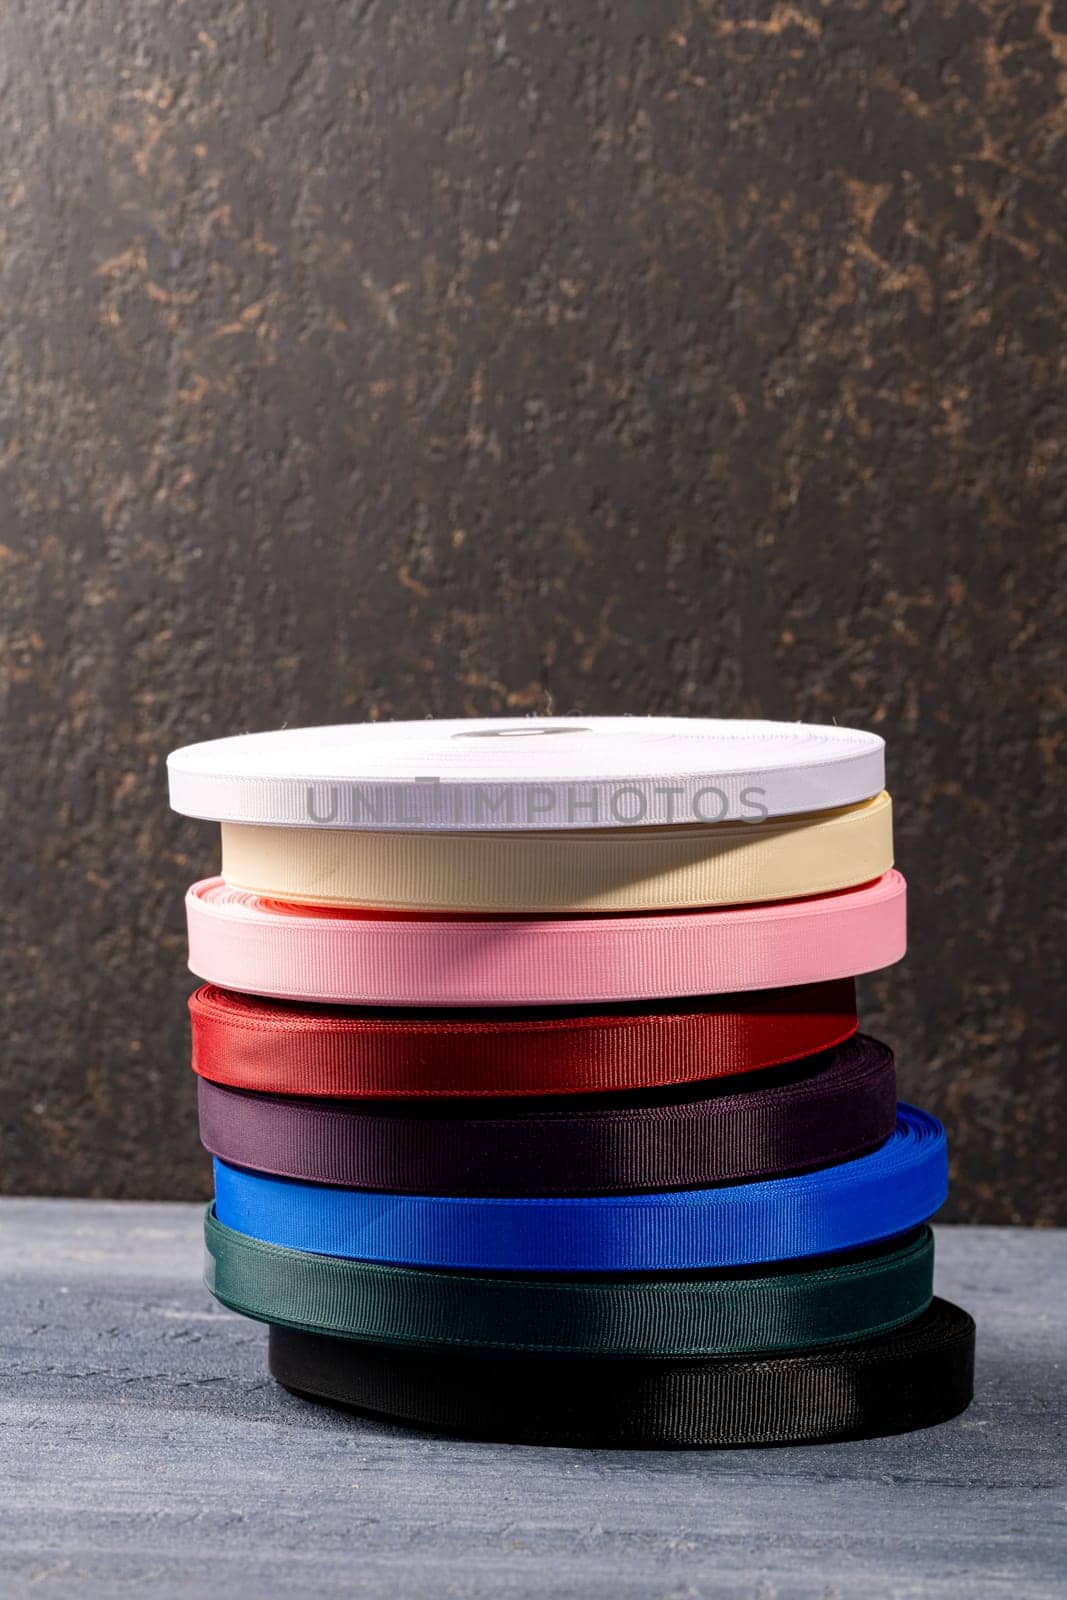 A vertical shot of a stack of colored fabric rolls for fashion design by A_Karim